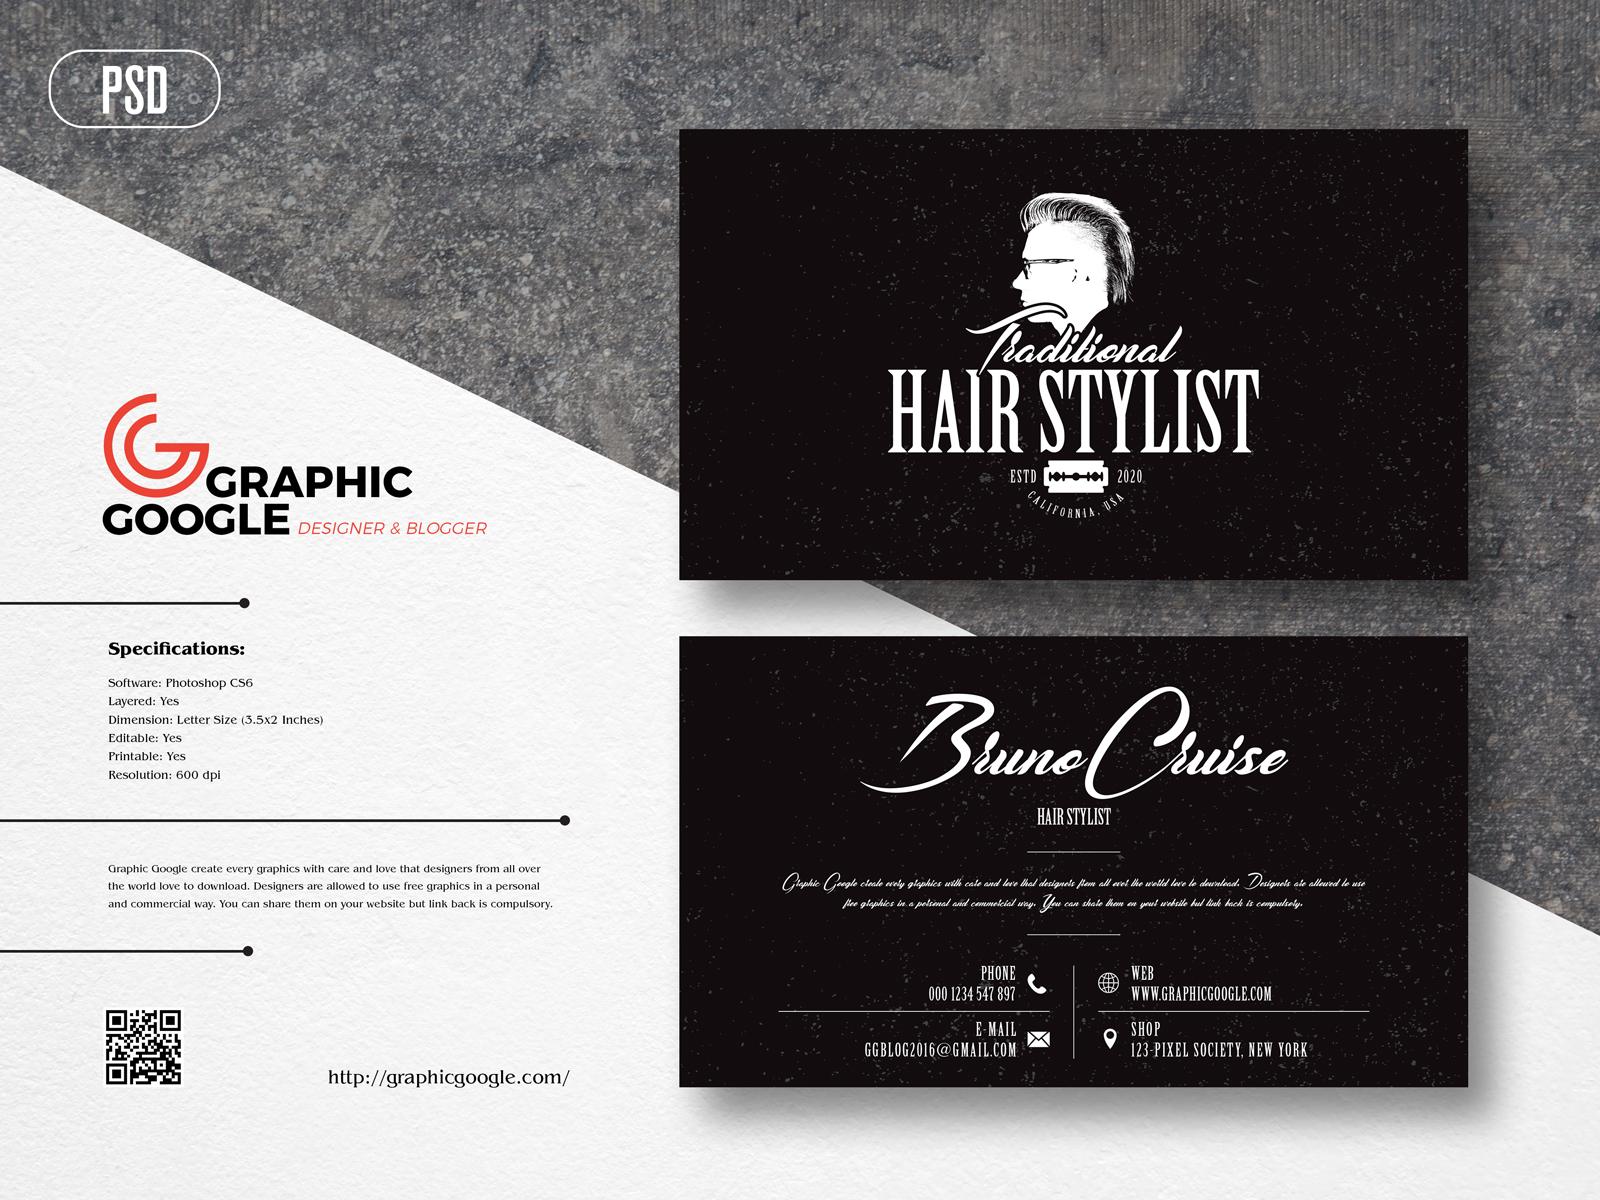 Free Hair Stylist Business Card Design Template by Graphic Google on